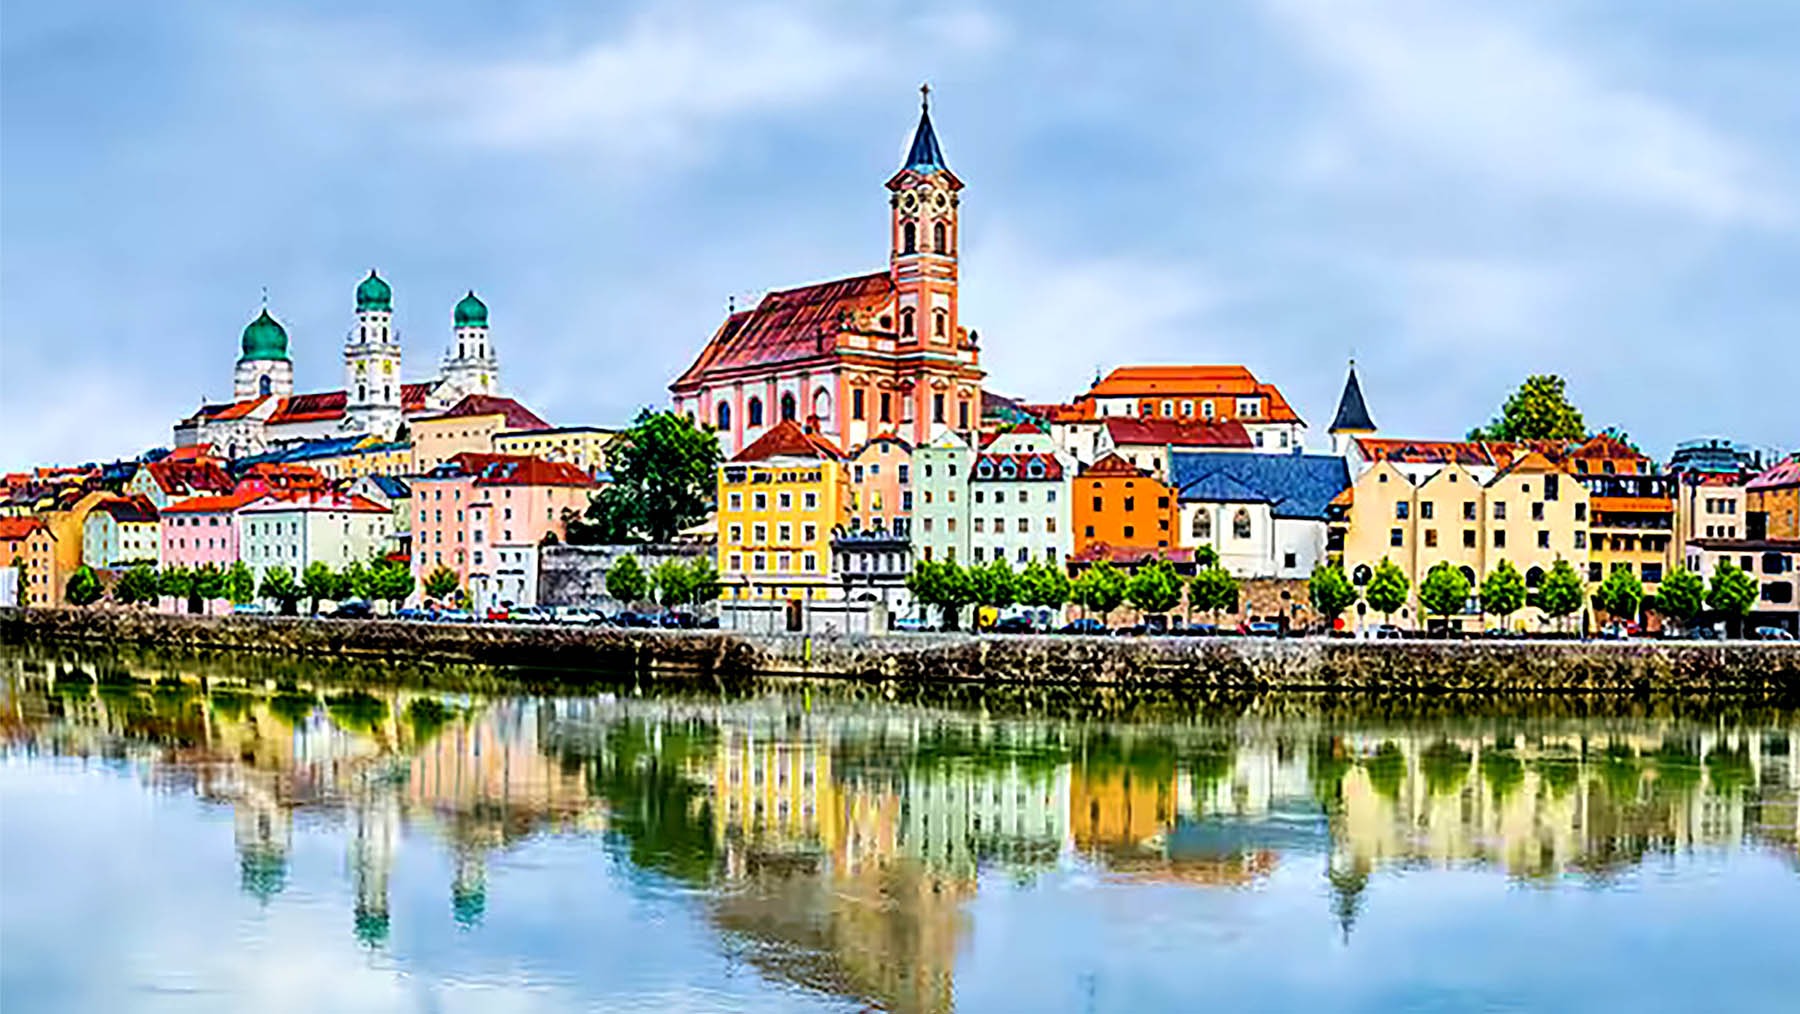 AmaWaterways offer best value river cruise deals for the legendary Danube. 